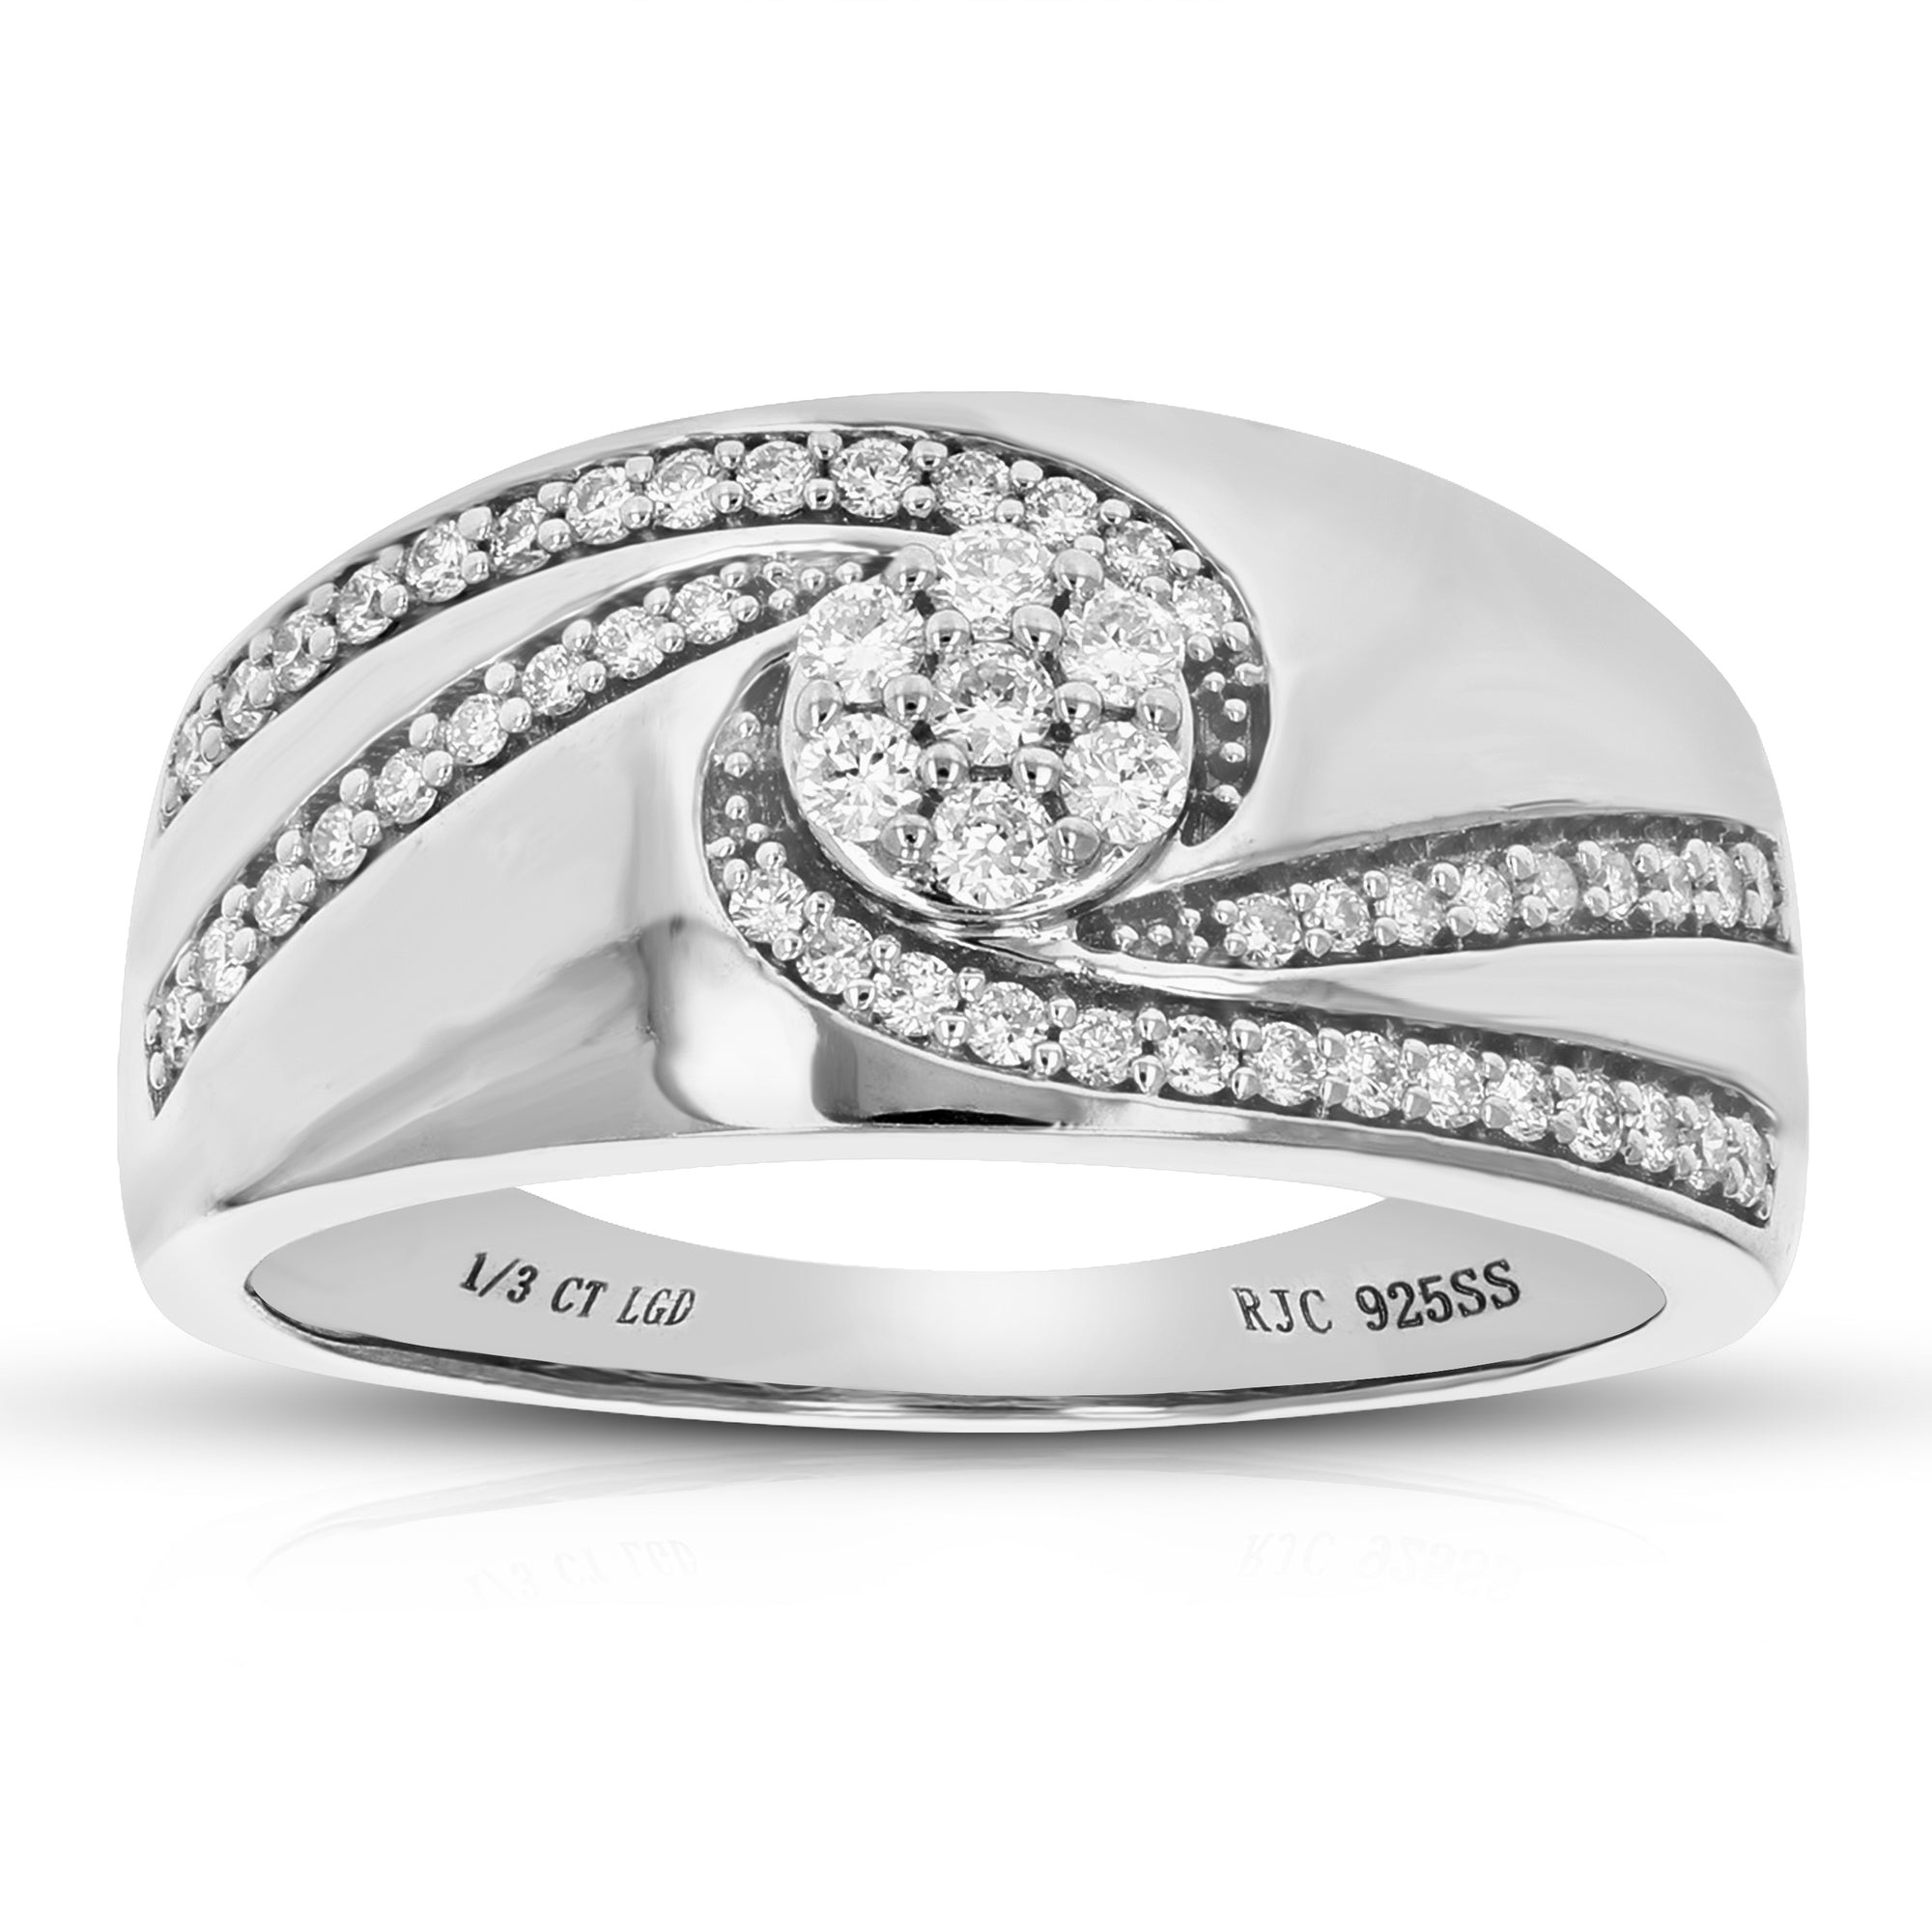 1/3 cttw Round Cut Lab Grown Diamond Wedding Band 53 Stones .925 Sterling Silver Prong Set